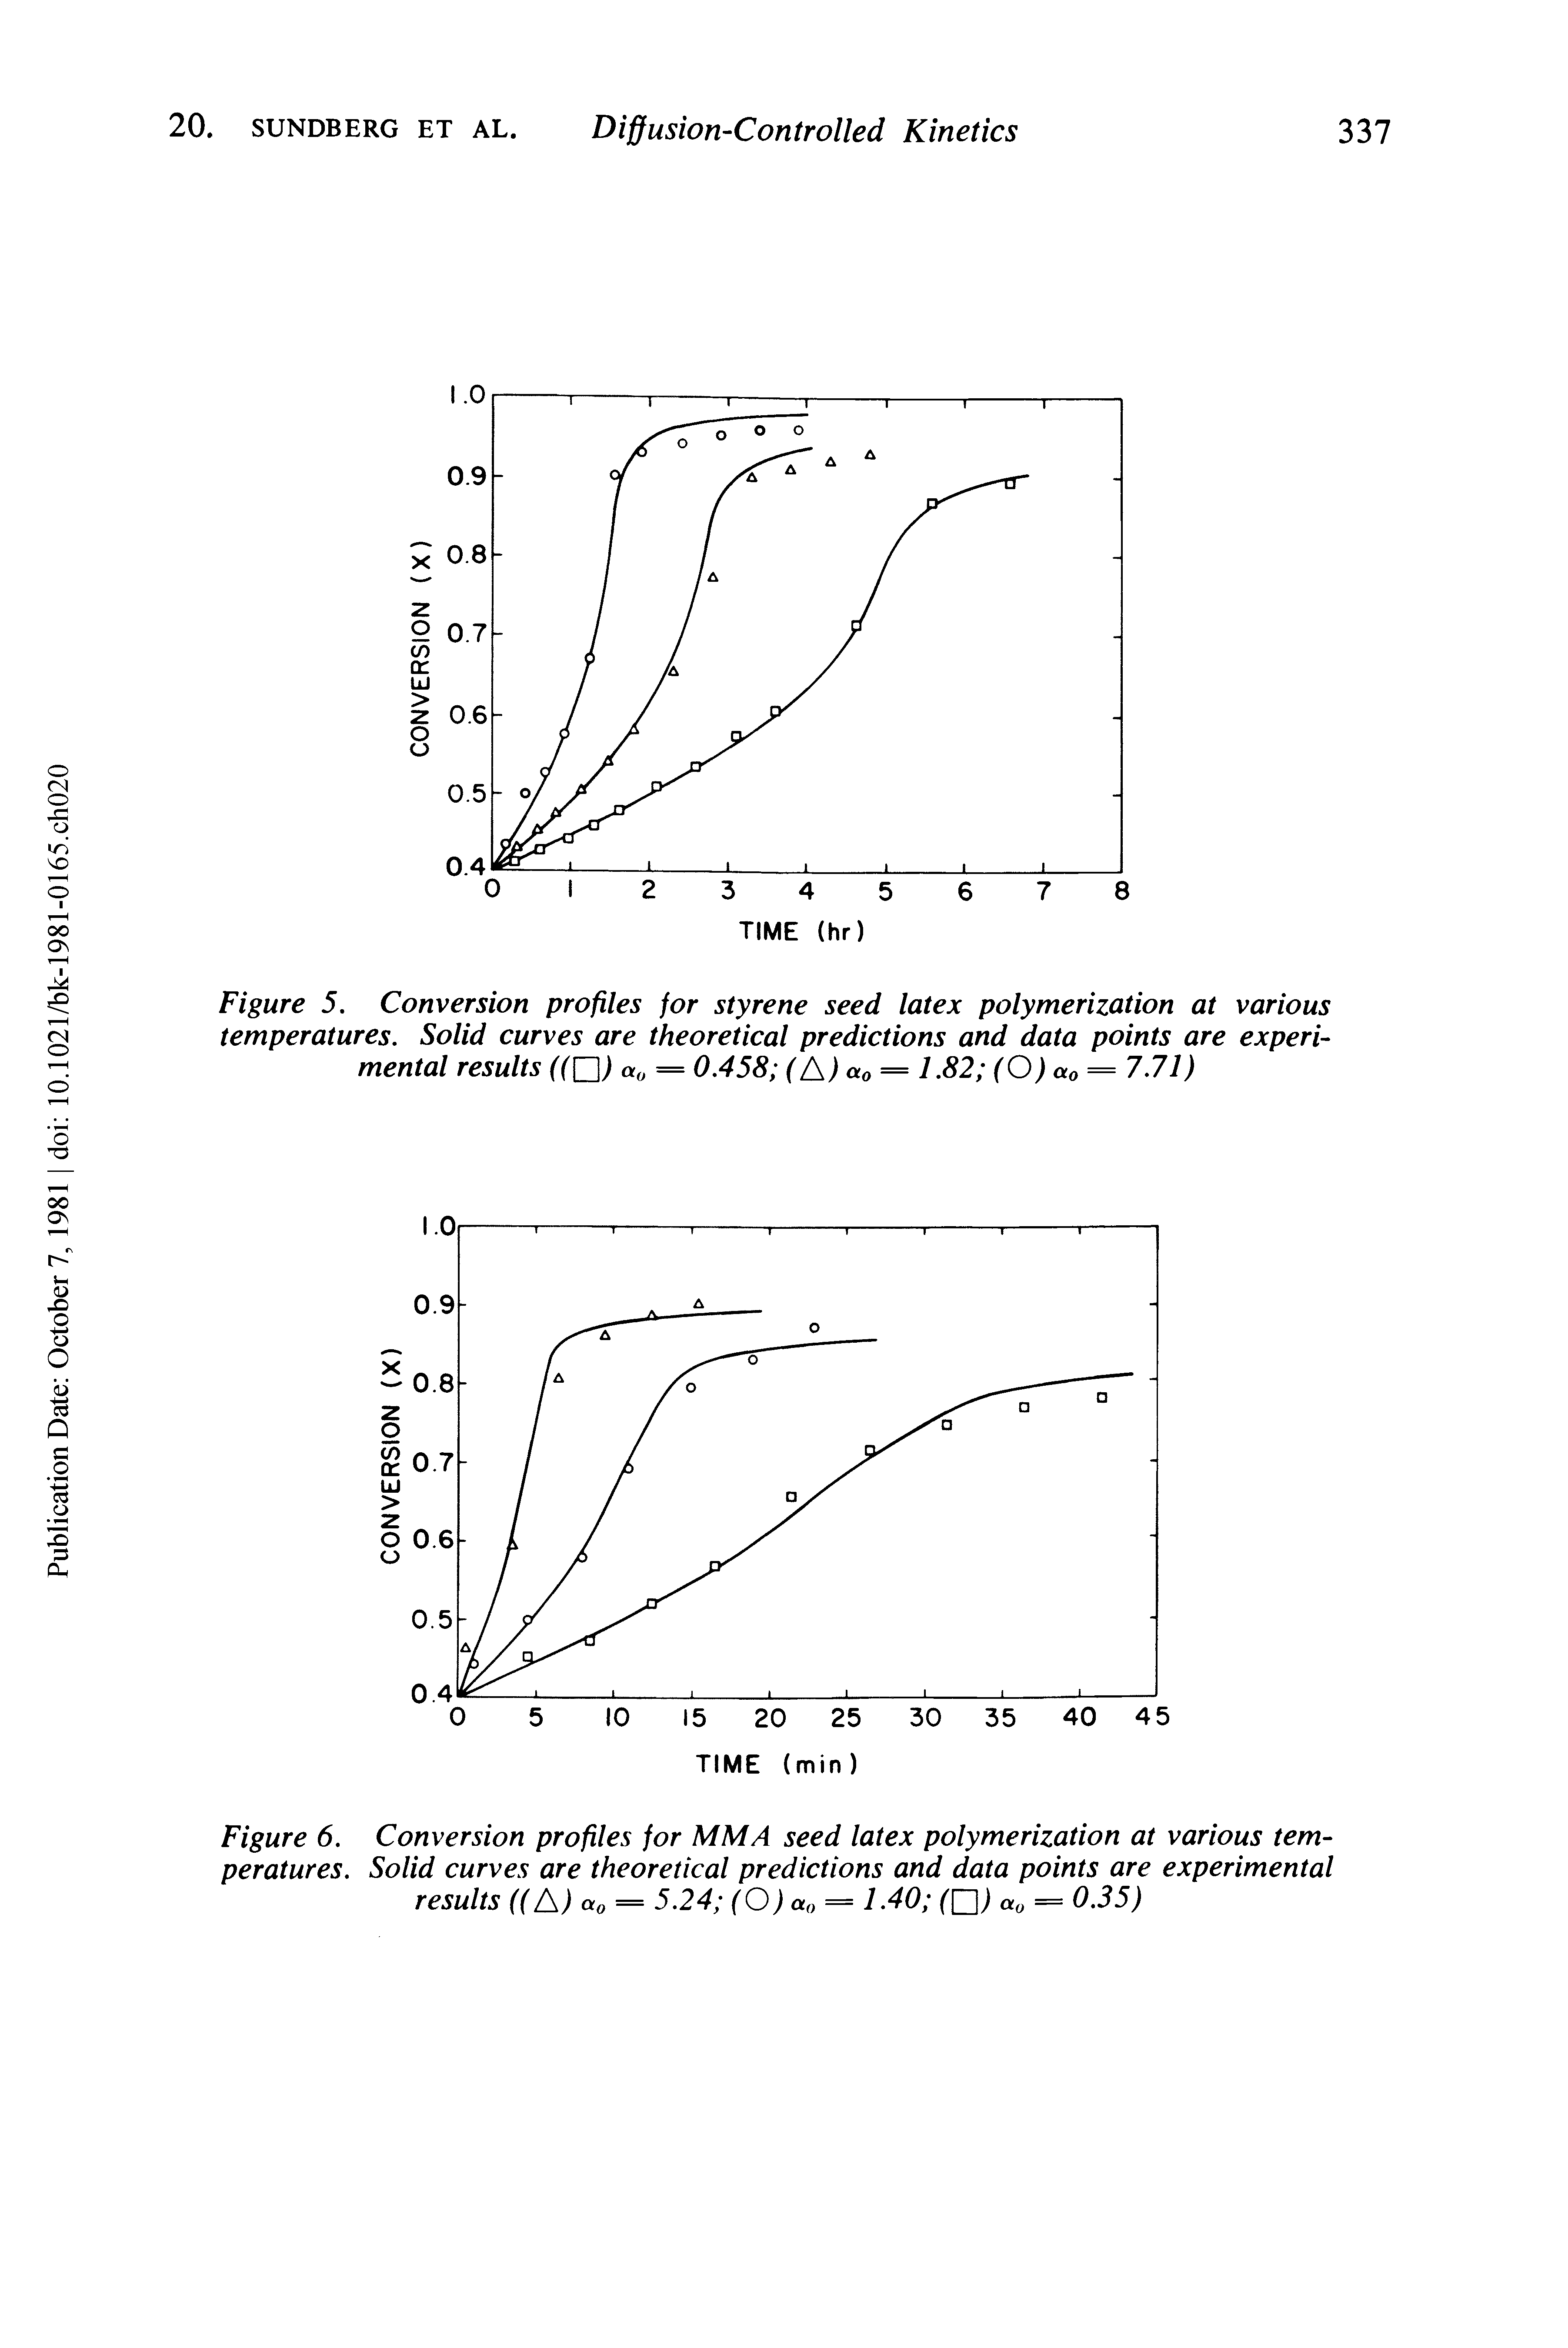 Figure 5. Conversion profiles for styrene seed latex polymerization at various temperatures. Solid curves are theoretical predictions and data points are experimental results (YD) a0 = 0.458 (A) a0 = 1.82 (O) a0 = 7.71)...